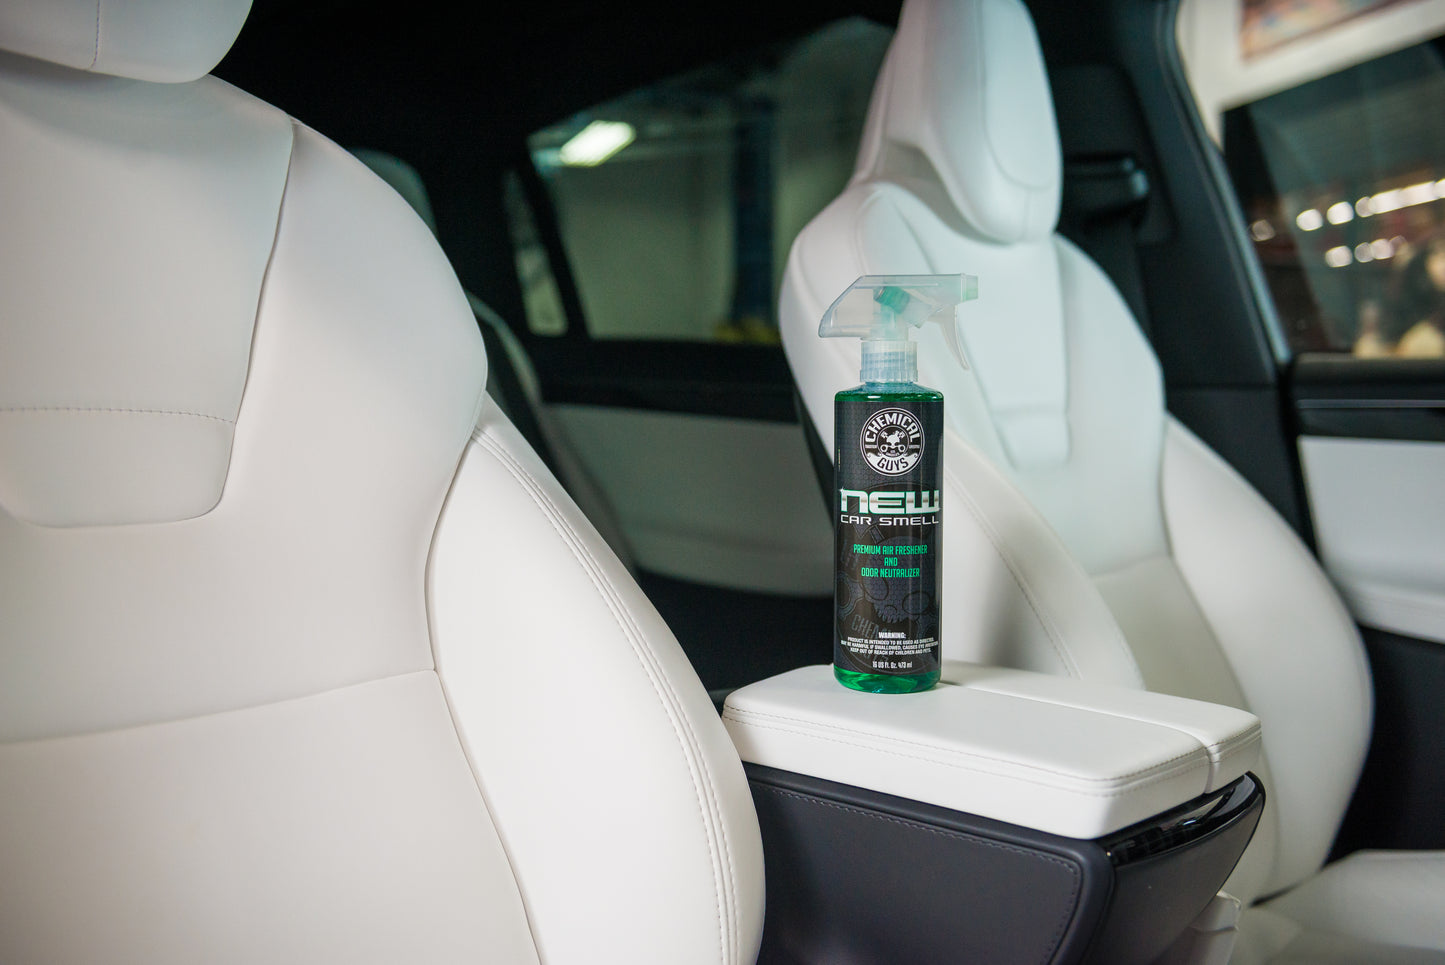 New Car & Leather Air Scent Combo Bundle